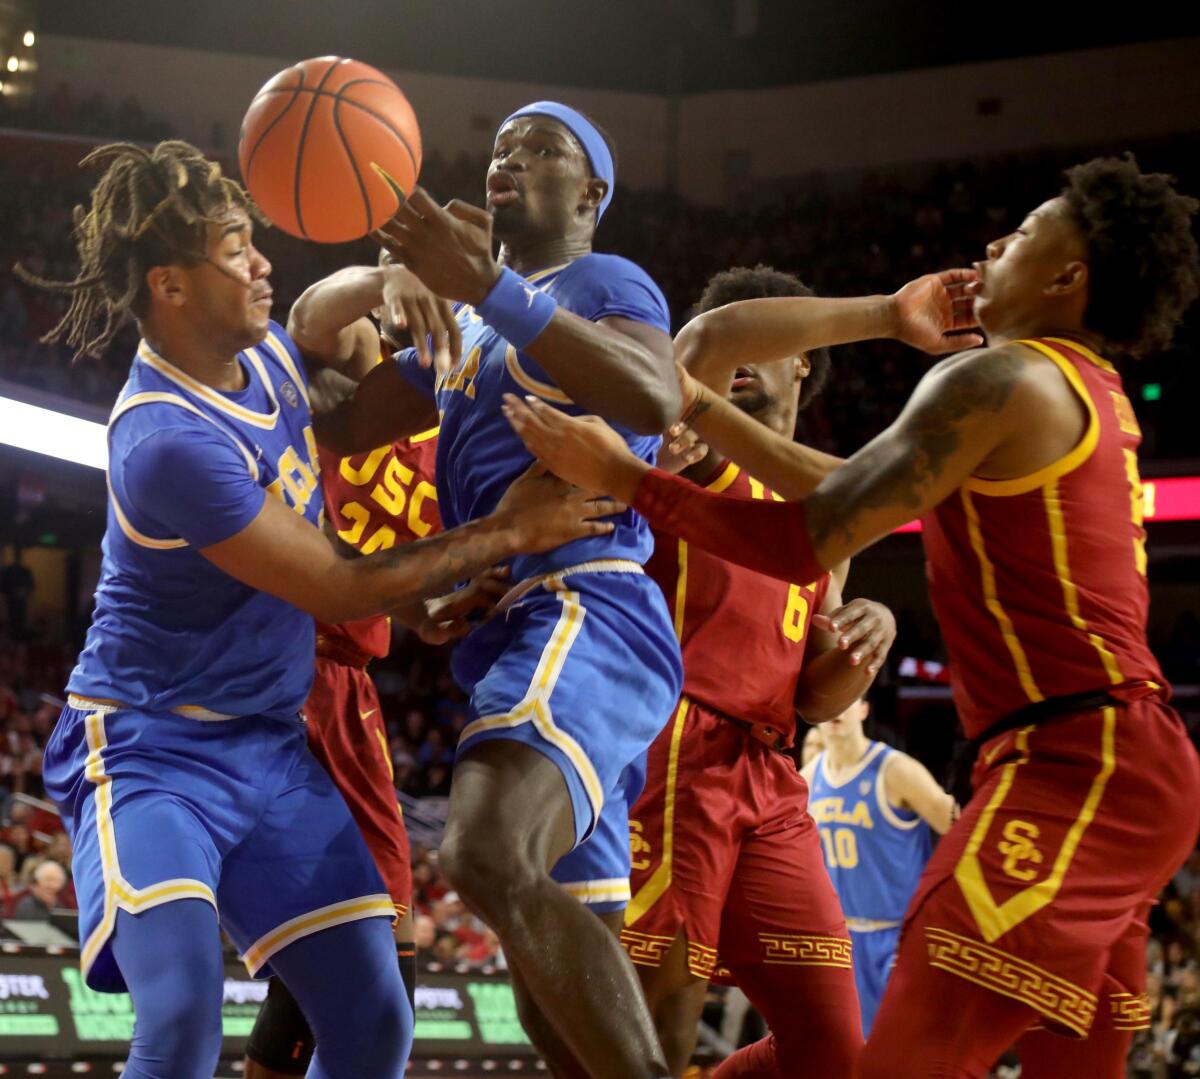 UCLA's Adem Bona, center, loses control of a ball during the Bruins' 65-50 win over USC at Galen Center.